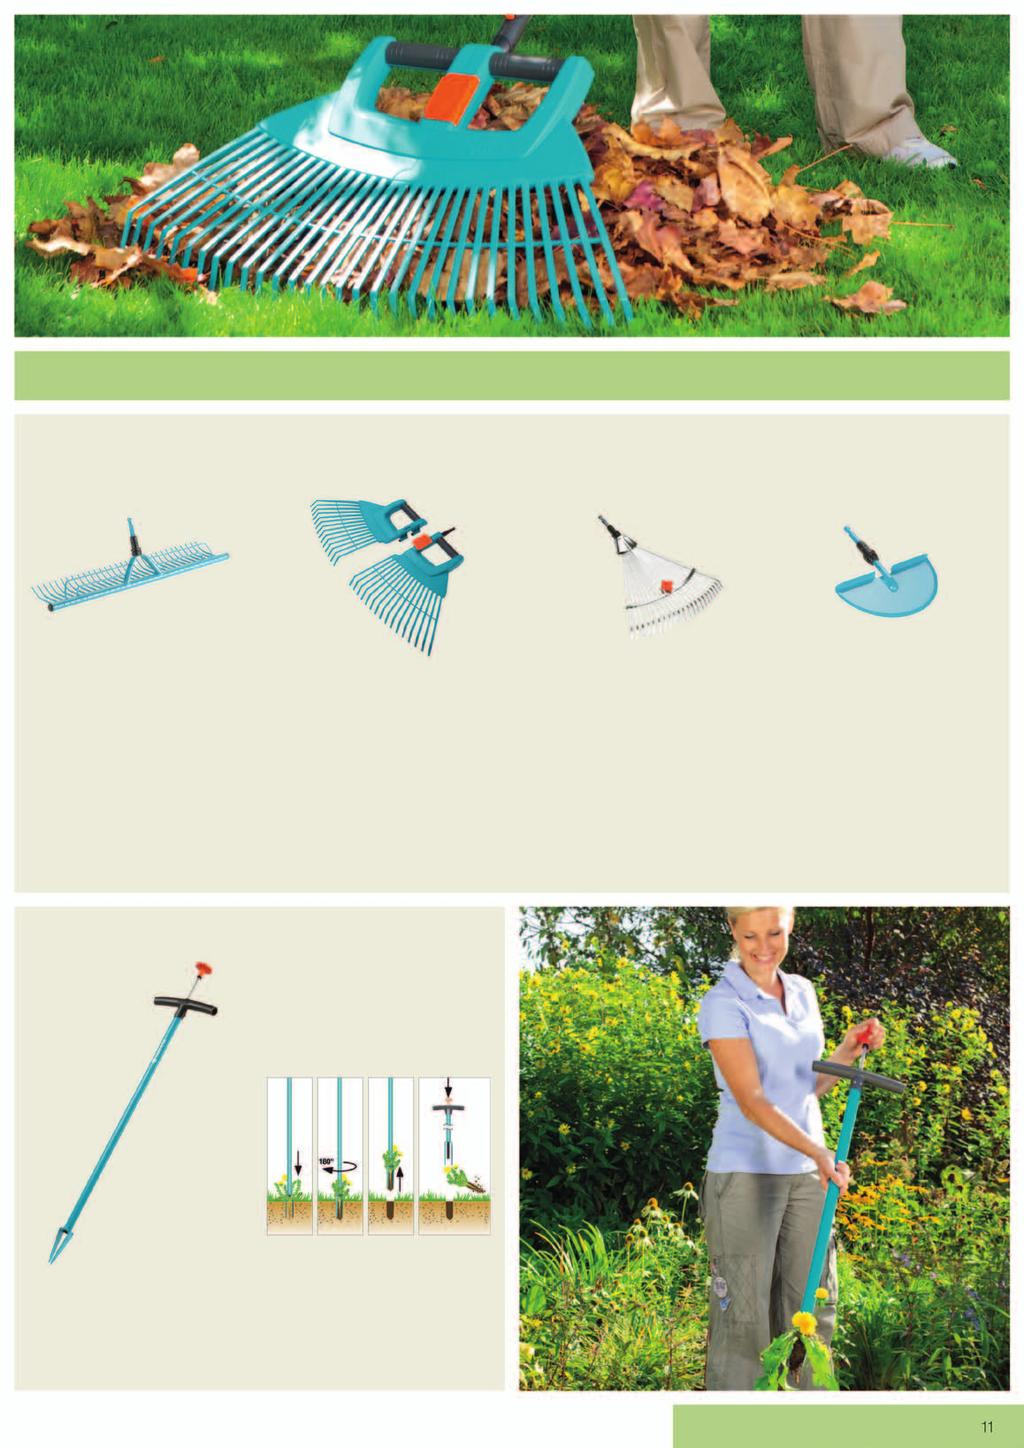 6 kg Output: 1000 W With PowerPlus Working width: 30 cm Grass catcher: optional Sharp, offset blades made of specially hardened, galvanised stainless steel penetrate the lawn by a few millimetres and